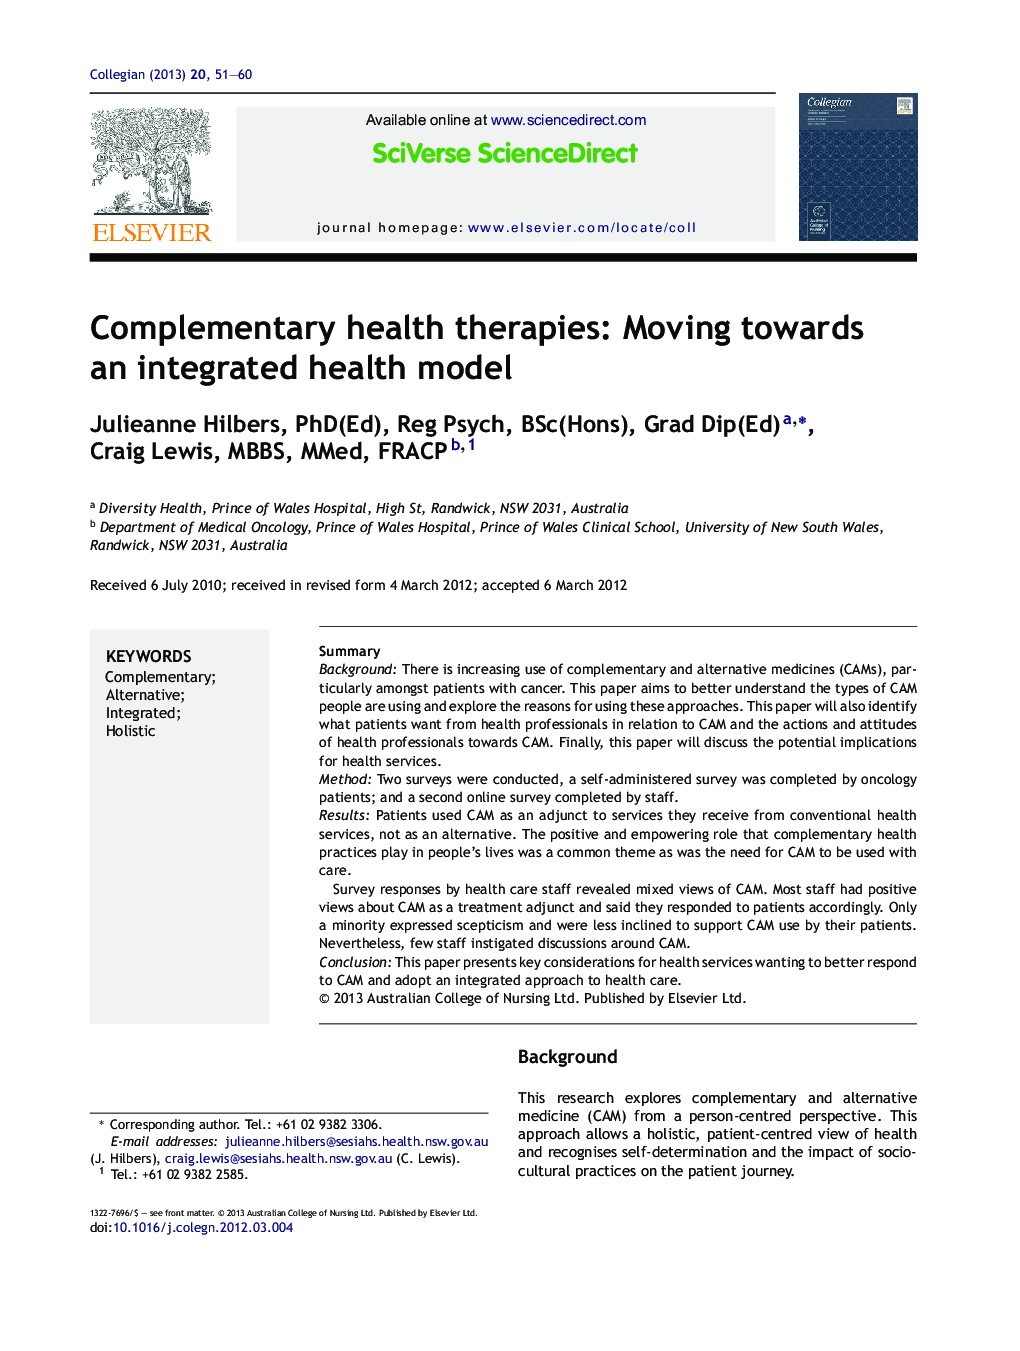 Complementary health therapies: Moving towards an integrated health model